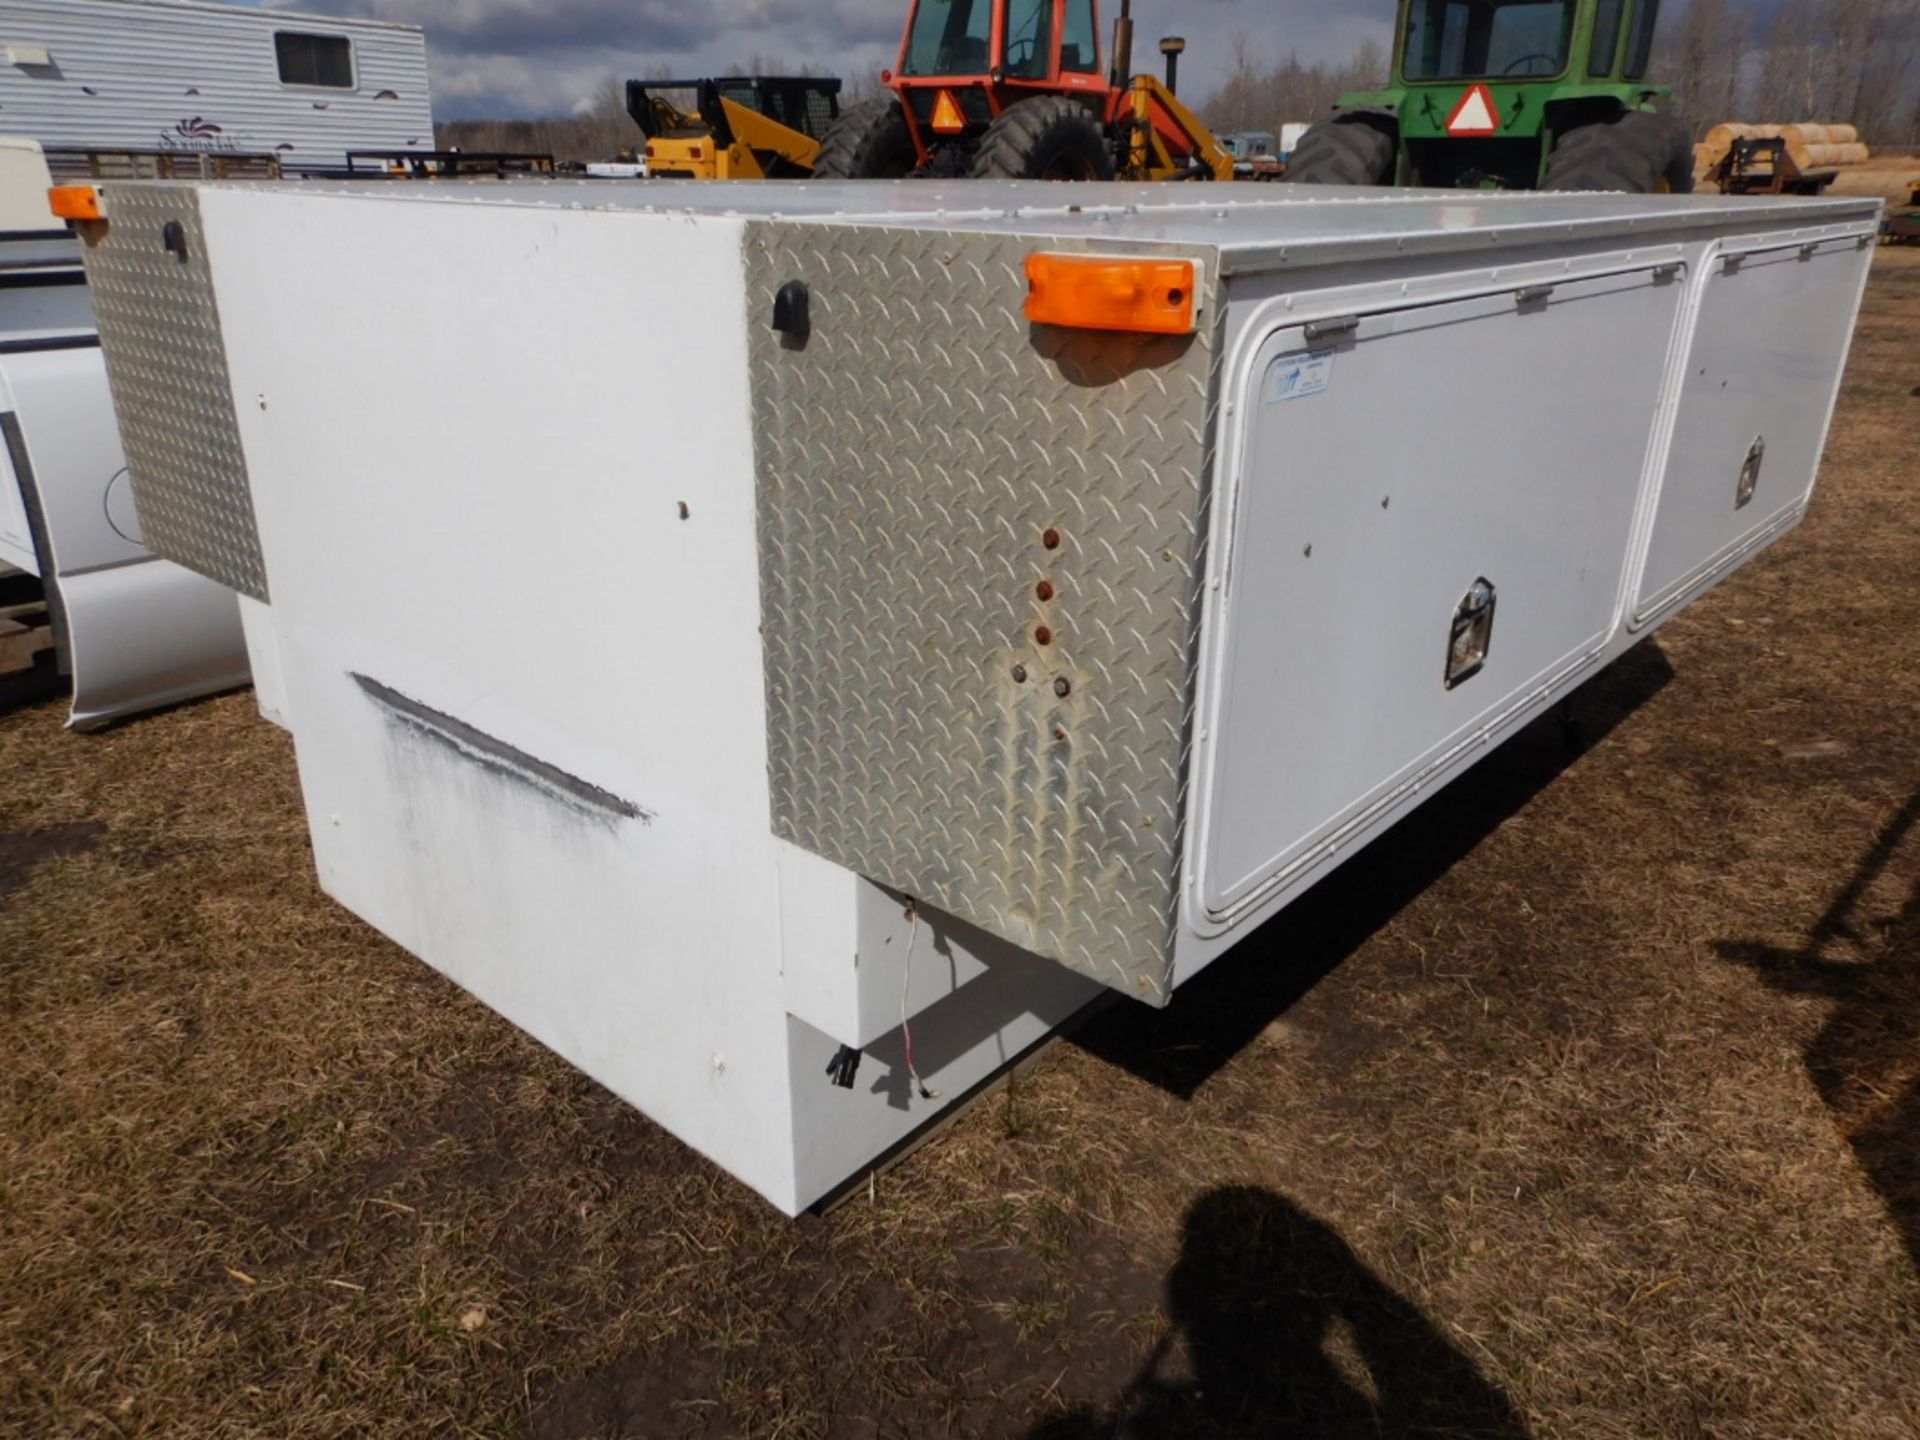 WESTERN TRUCK BODY 8FT SERVICE BODY W/ EXTERIOR TOOL BOXES AND TRUCK BED CARGO SLIDE - Image 3 of 11